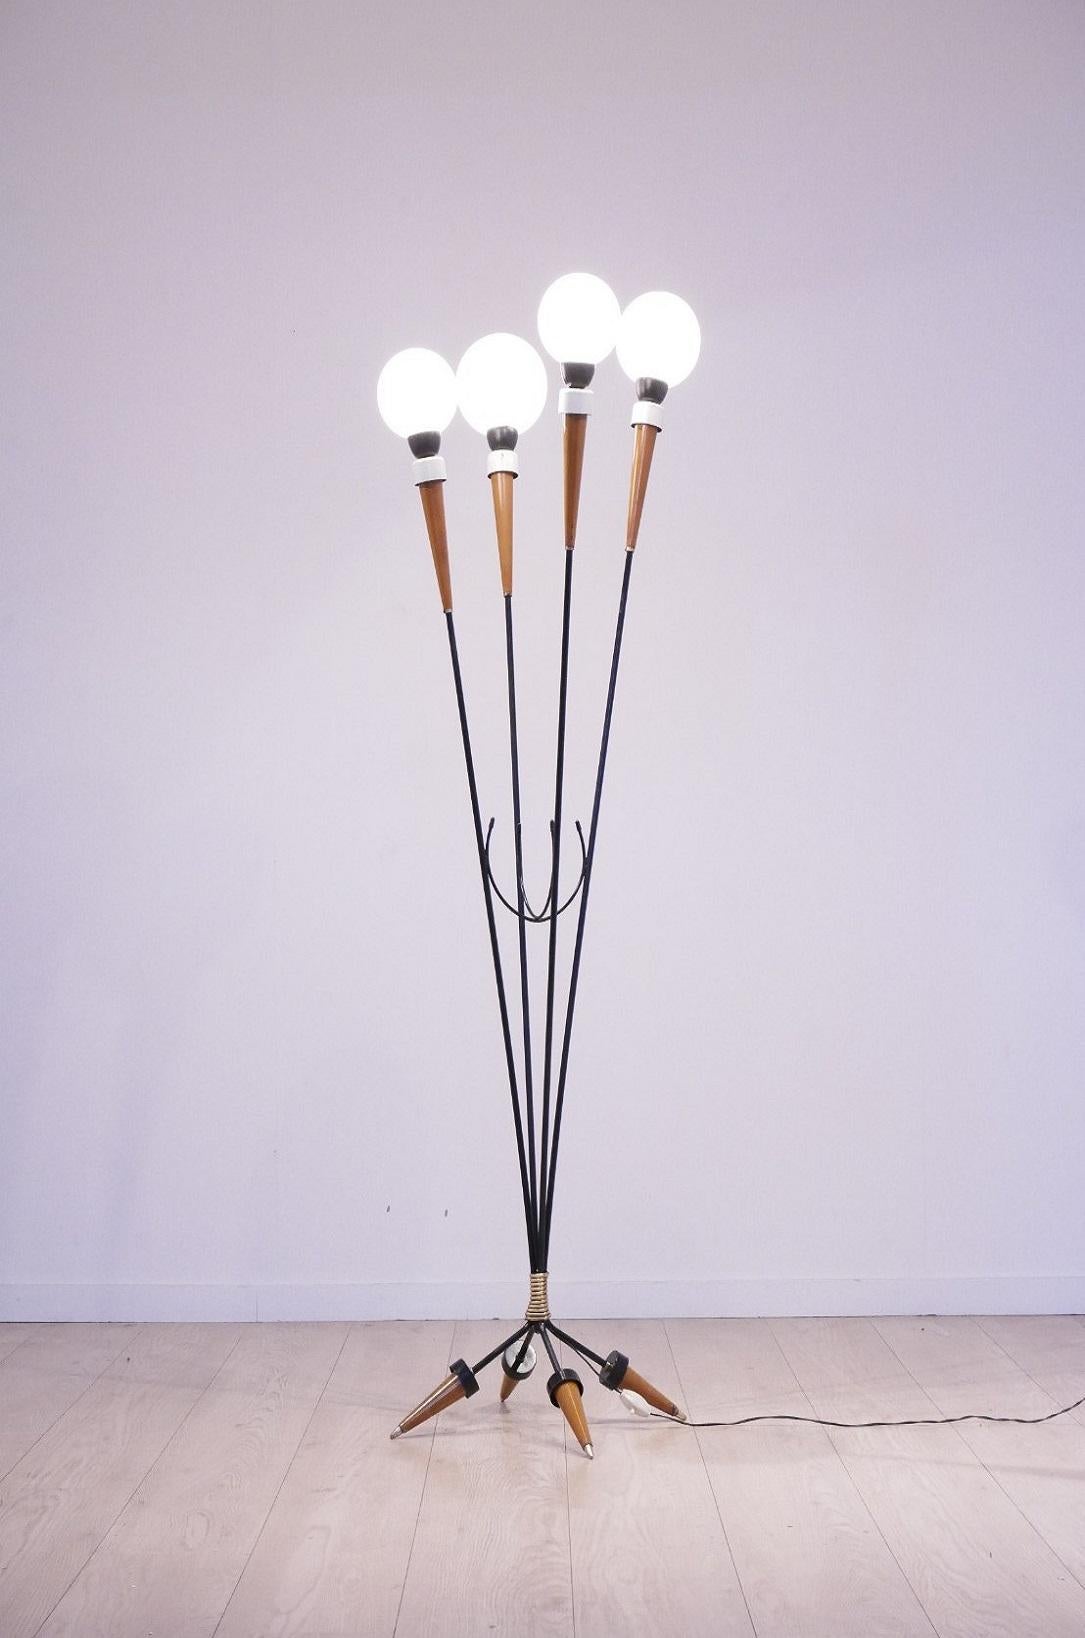 Midcentury floor lamp with a minimalistic style, 4 metal stems topped by opalescent glass balls at several heights, brown bakelite flute shaped and full brass elements. 4 opaline glass ball shaped diffusers - they have a slight size